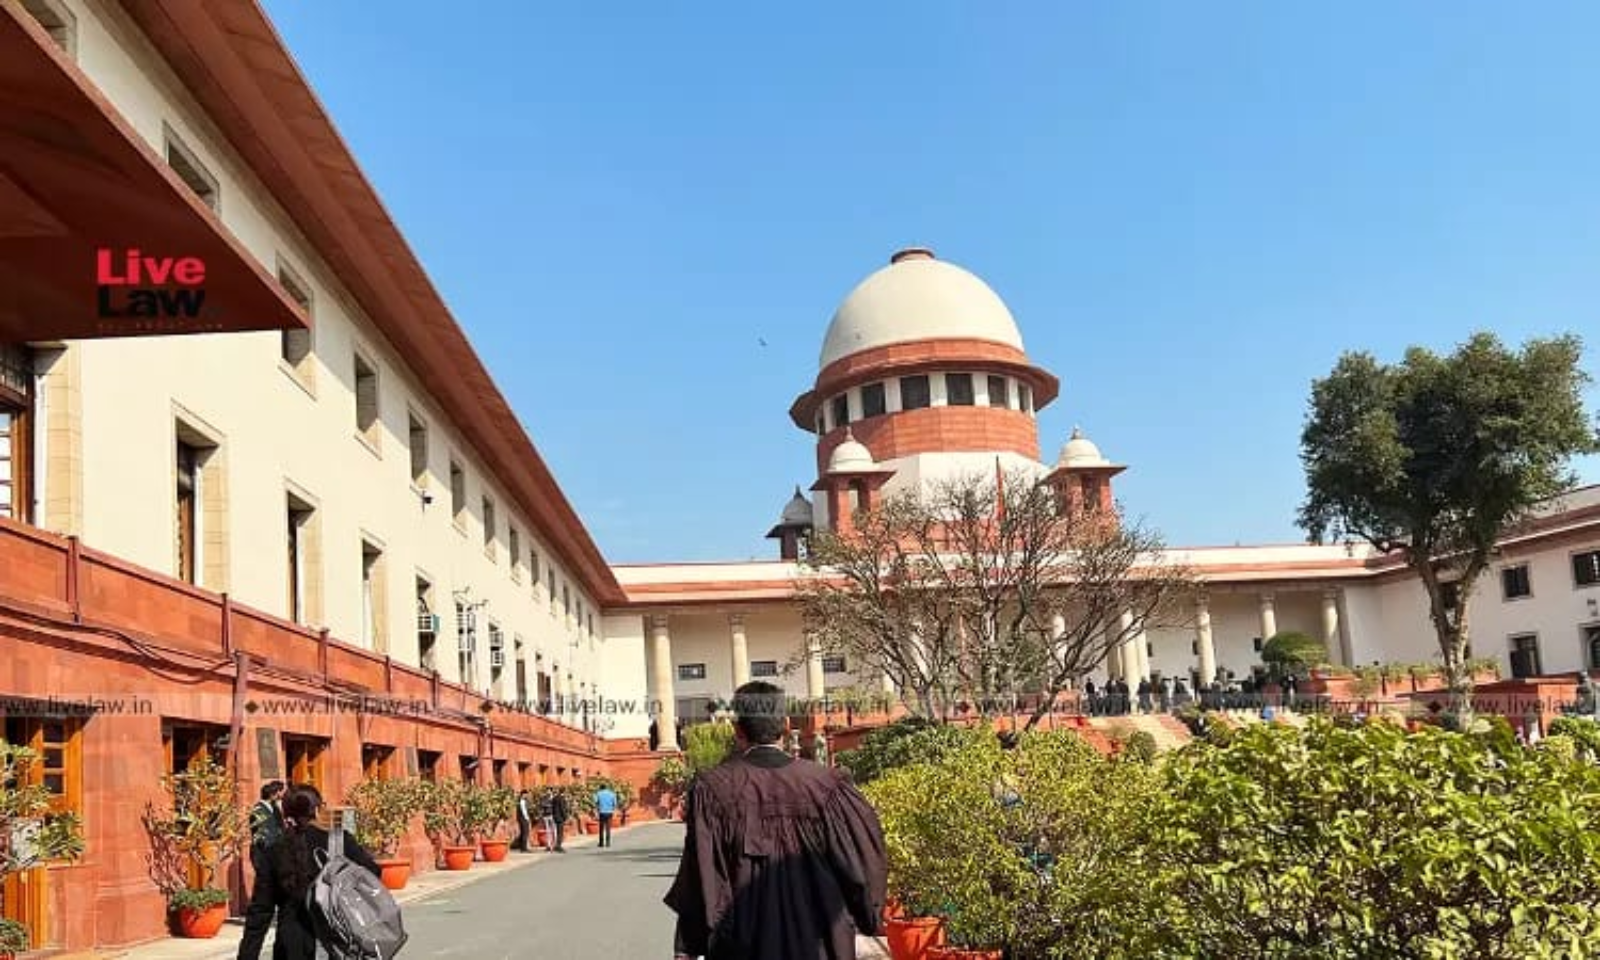 Xxx Reap Hd Videos - Substantial Progress Made To Prevent Circulation Of Child Porn, Rape Videos  On Social Media': Supreme Court Closes PIL